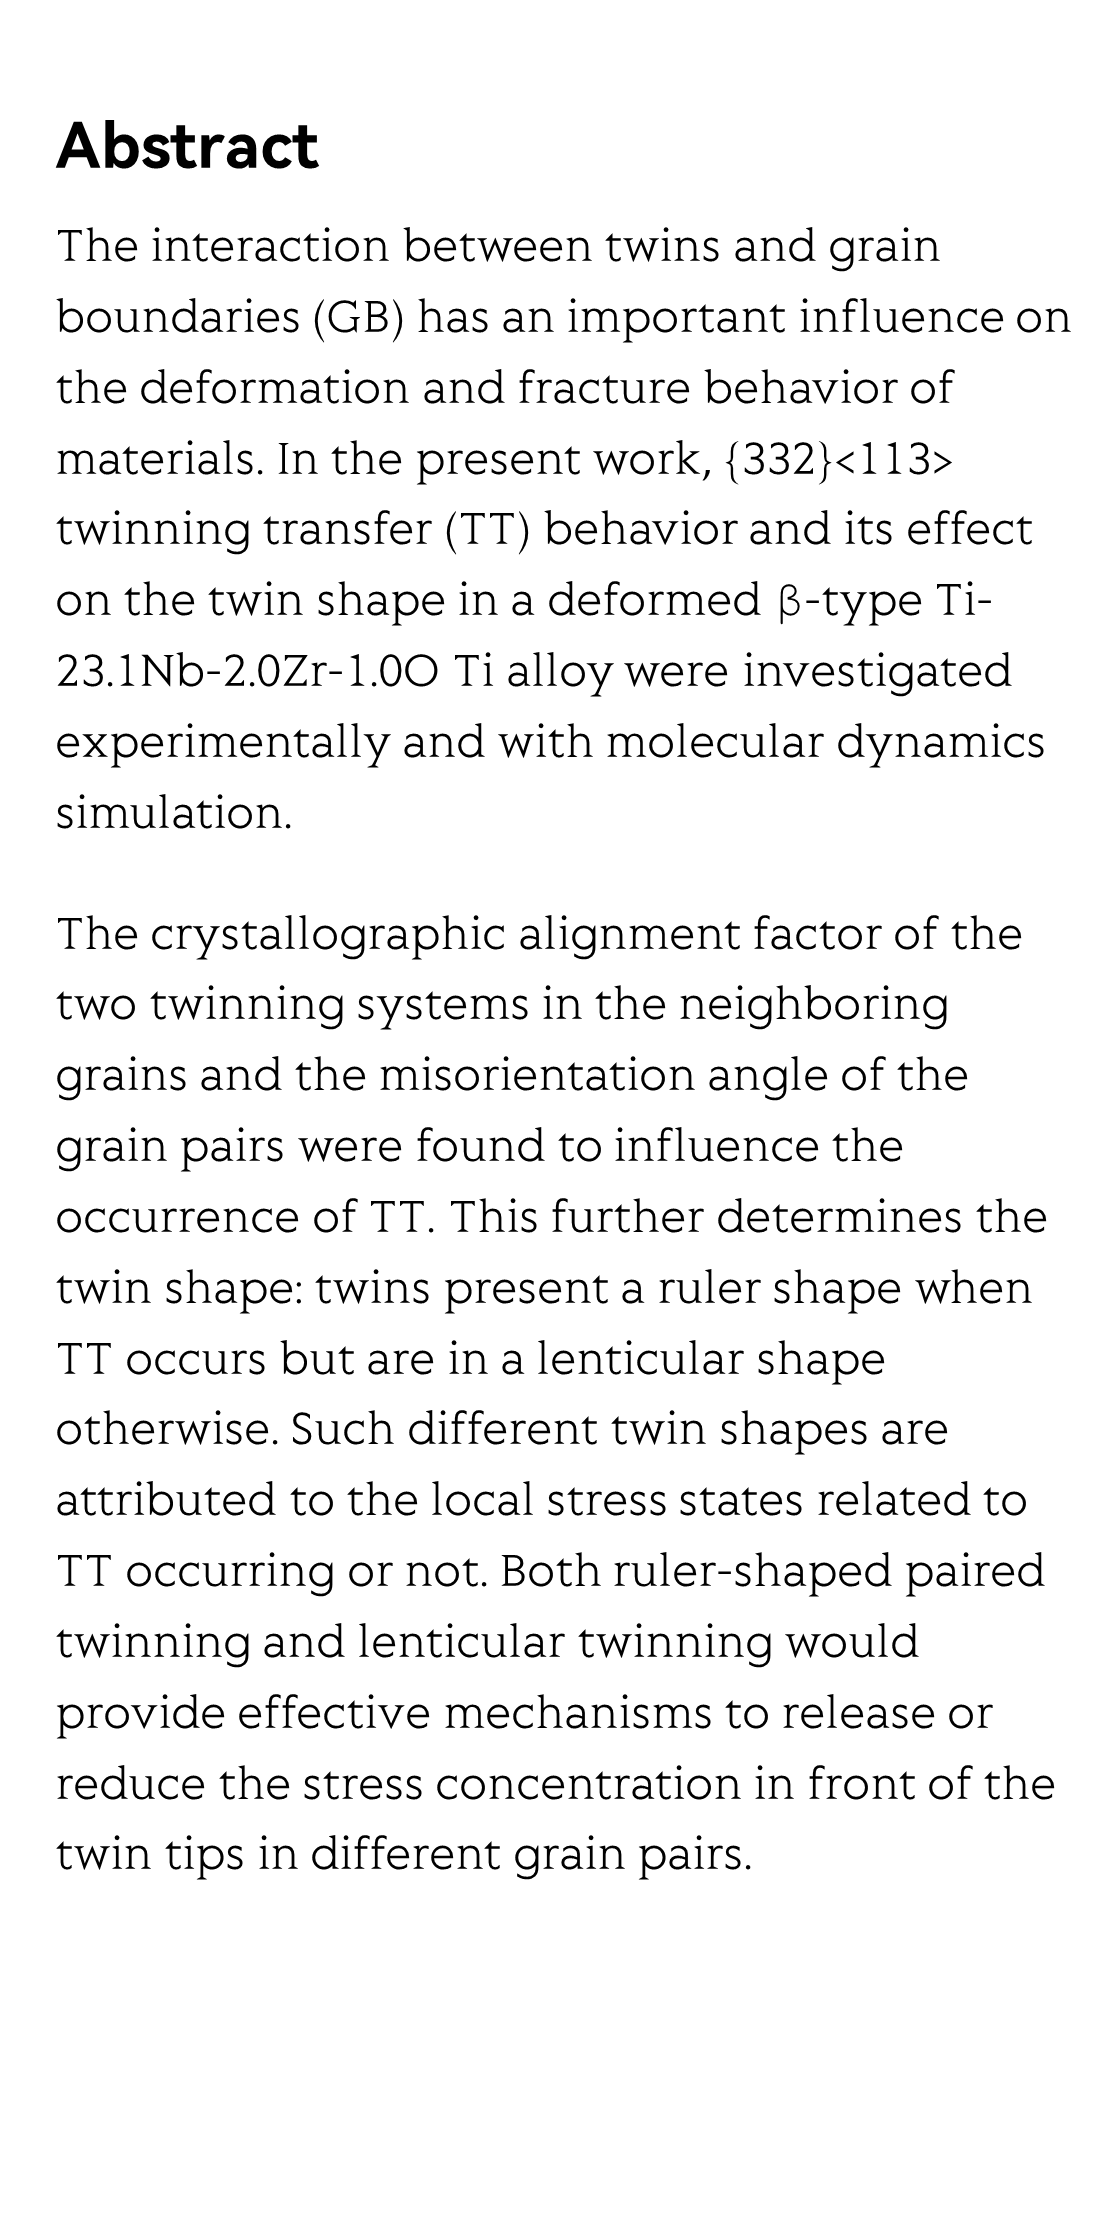 {332}<113>Twinning transfer behavior and its effect on the twin shape in a beta-type Ti-23.1Nb-2.0Zr-1.0O alloy_2